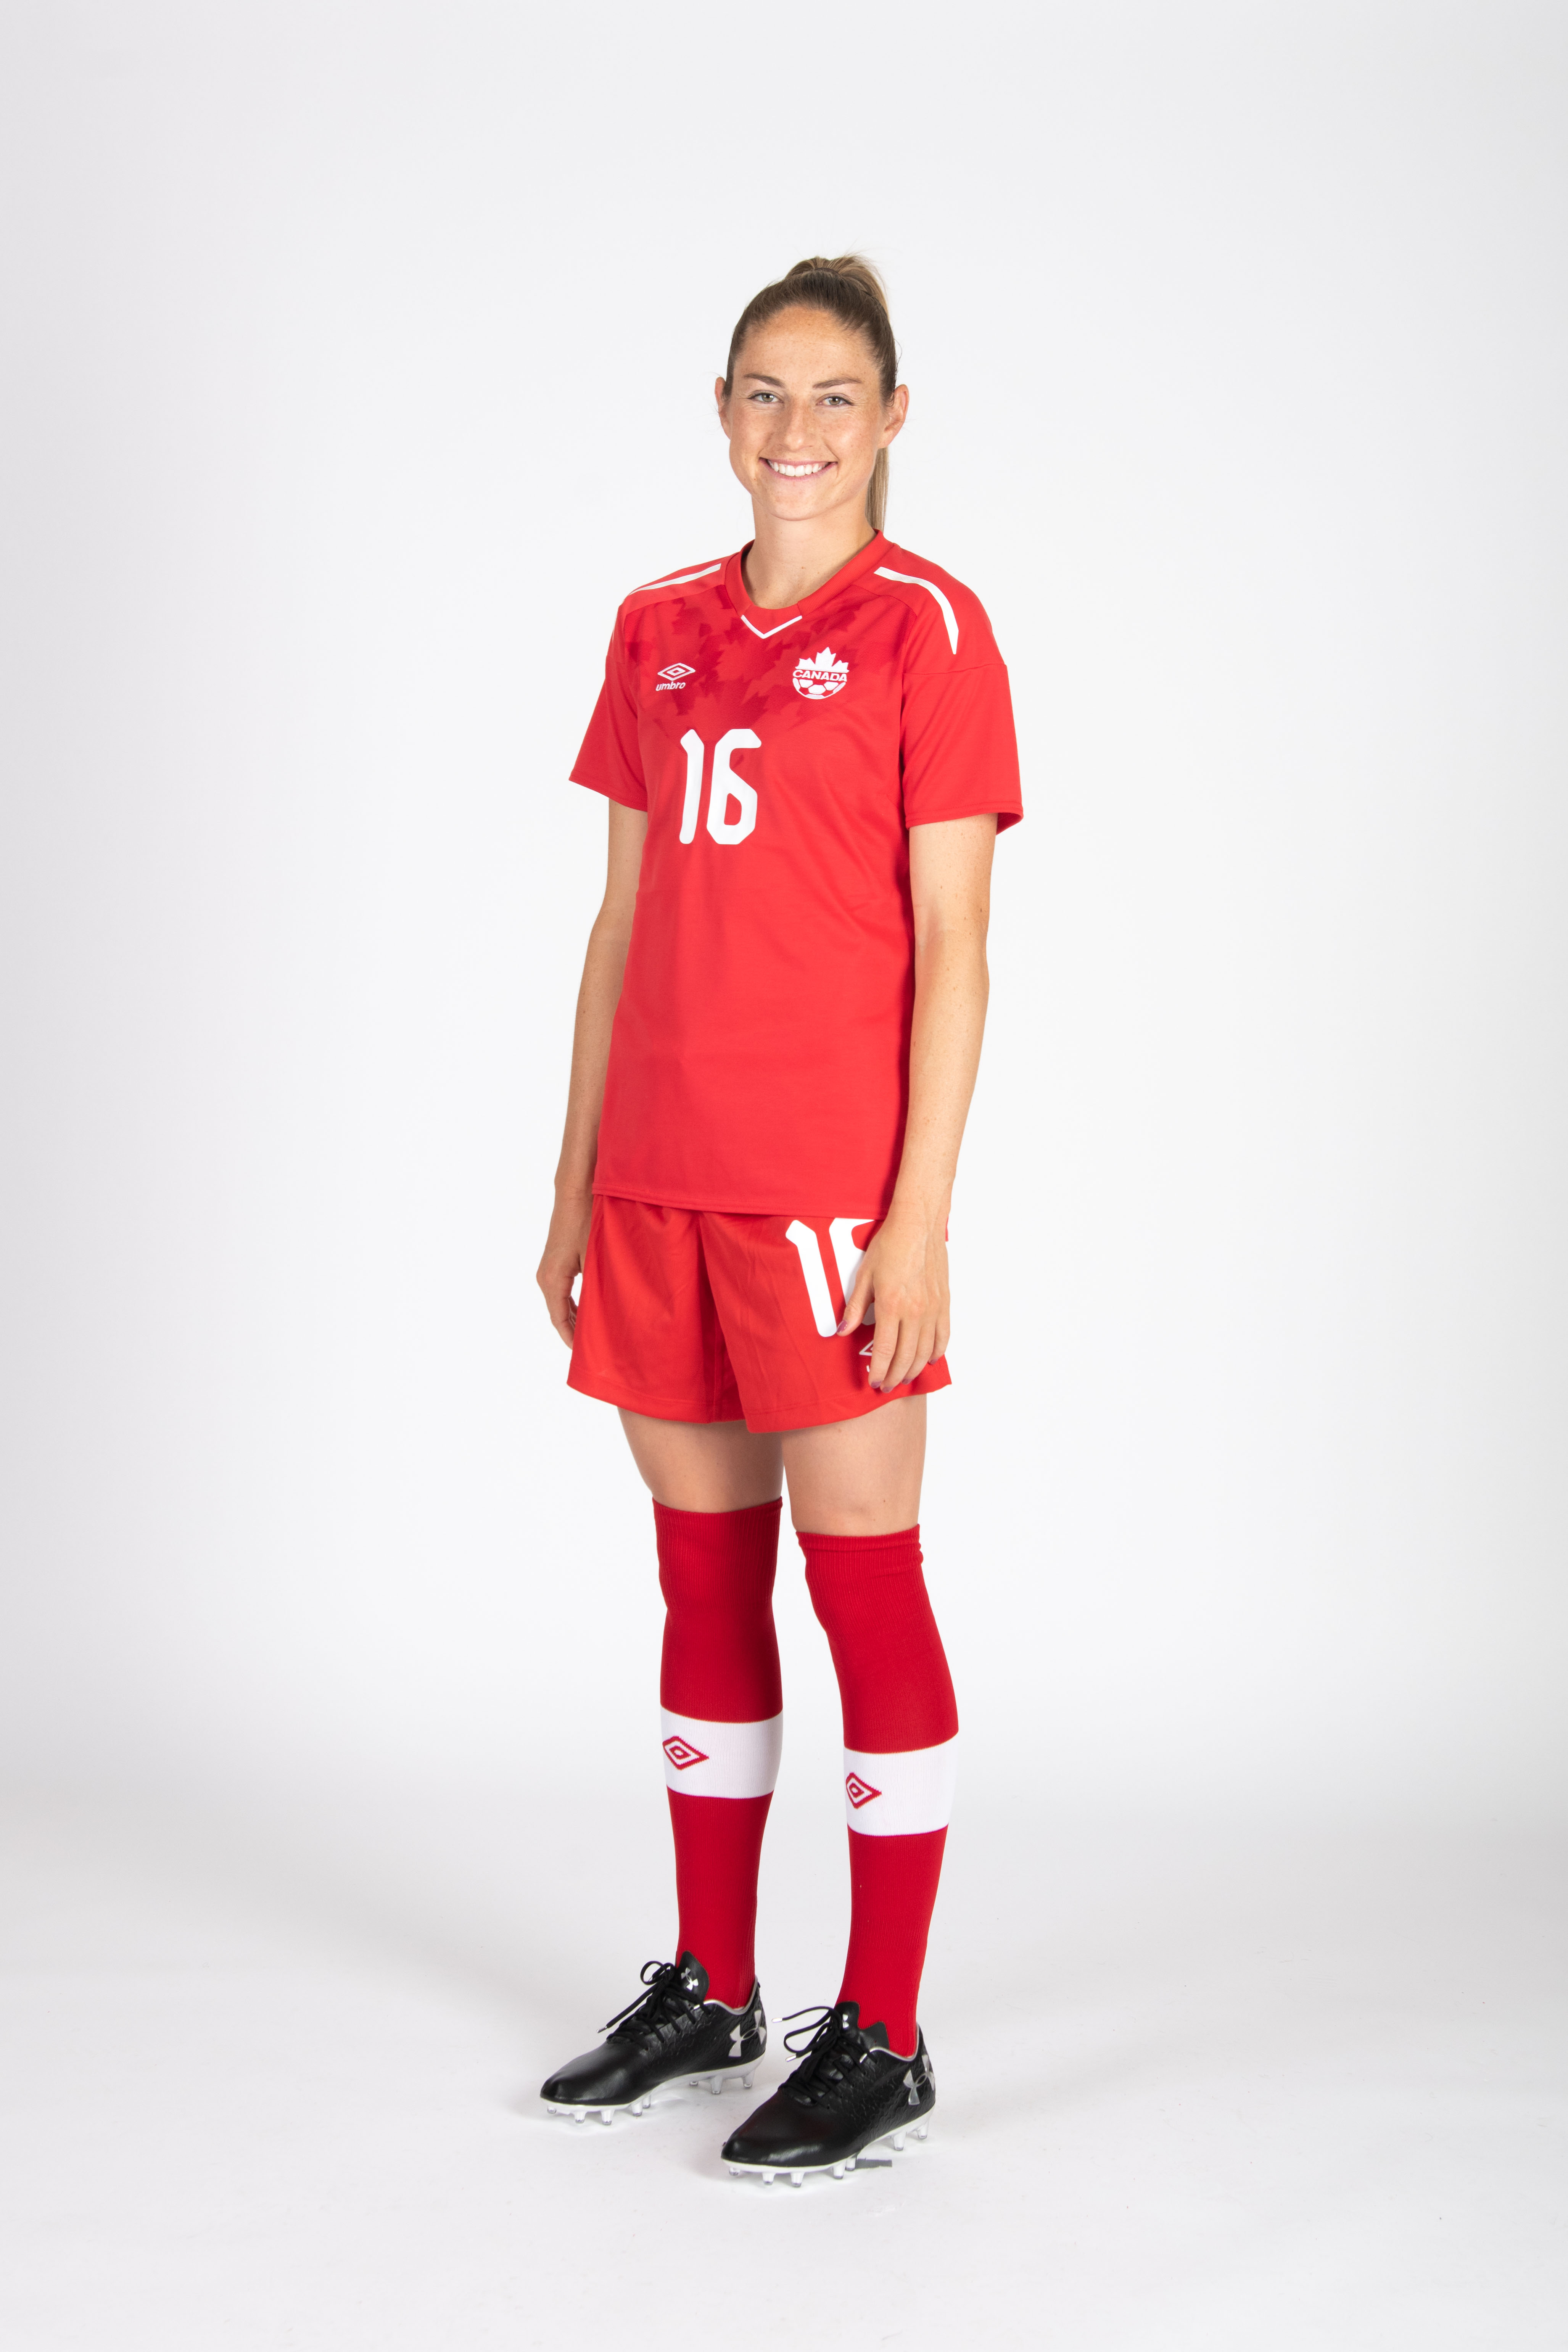 20180604_CANWNT_Beckie_byBazyl27